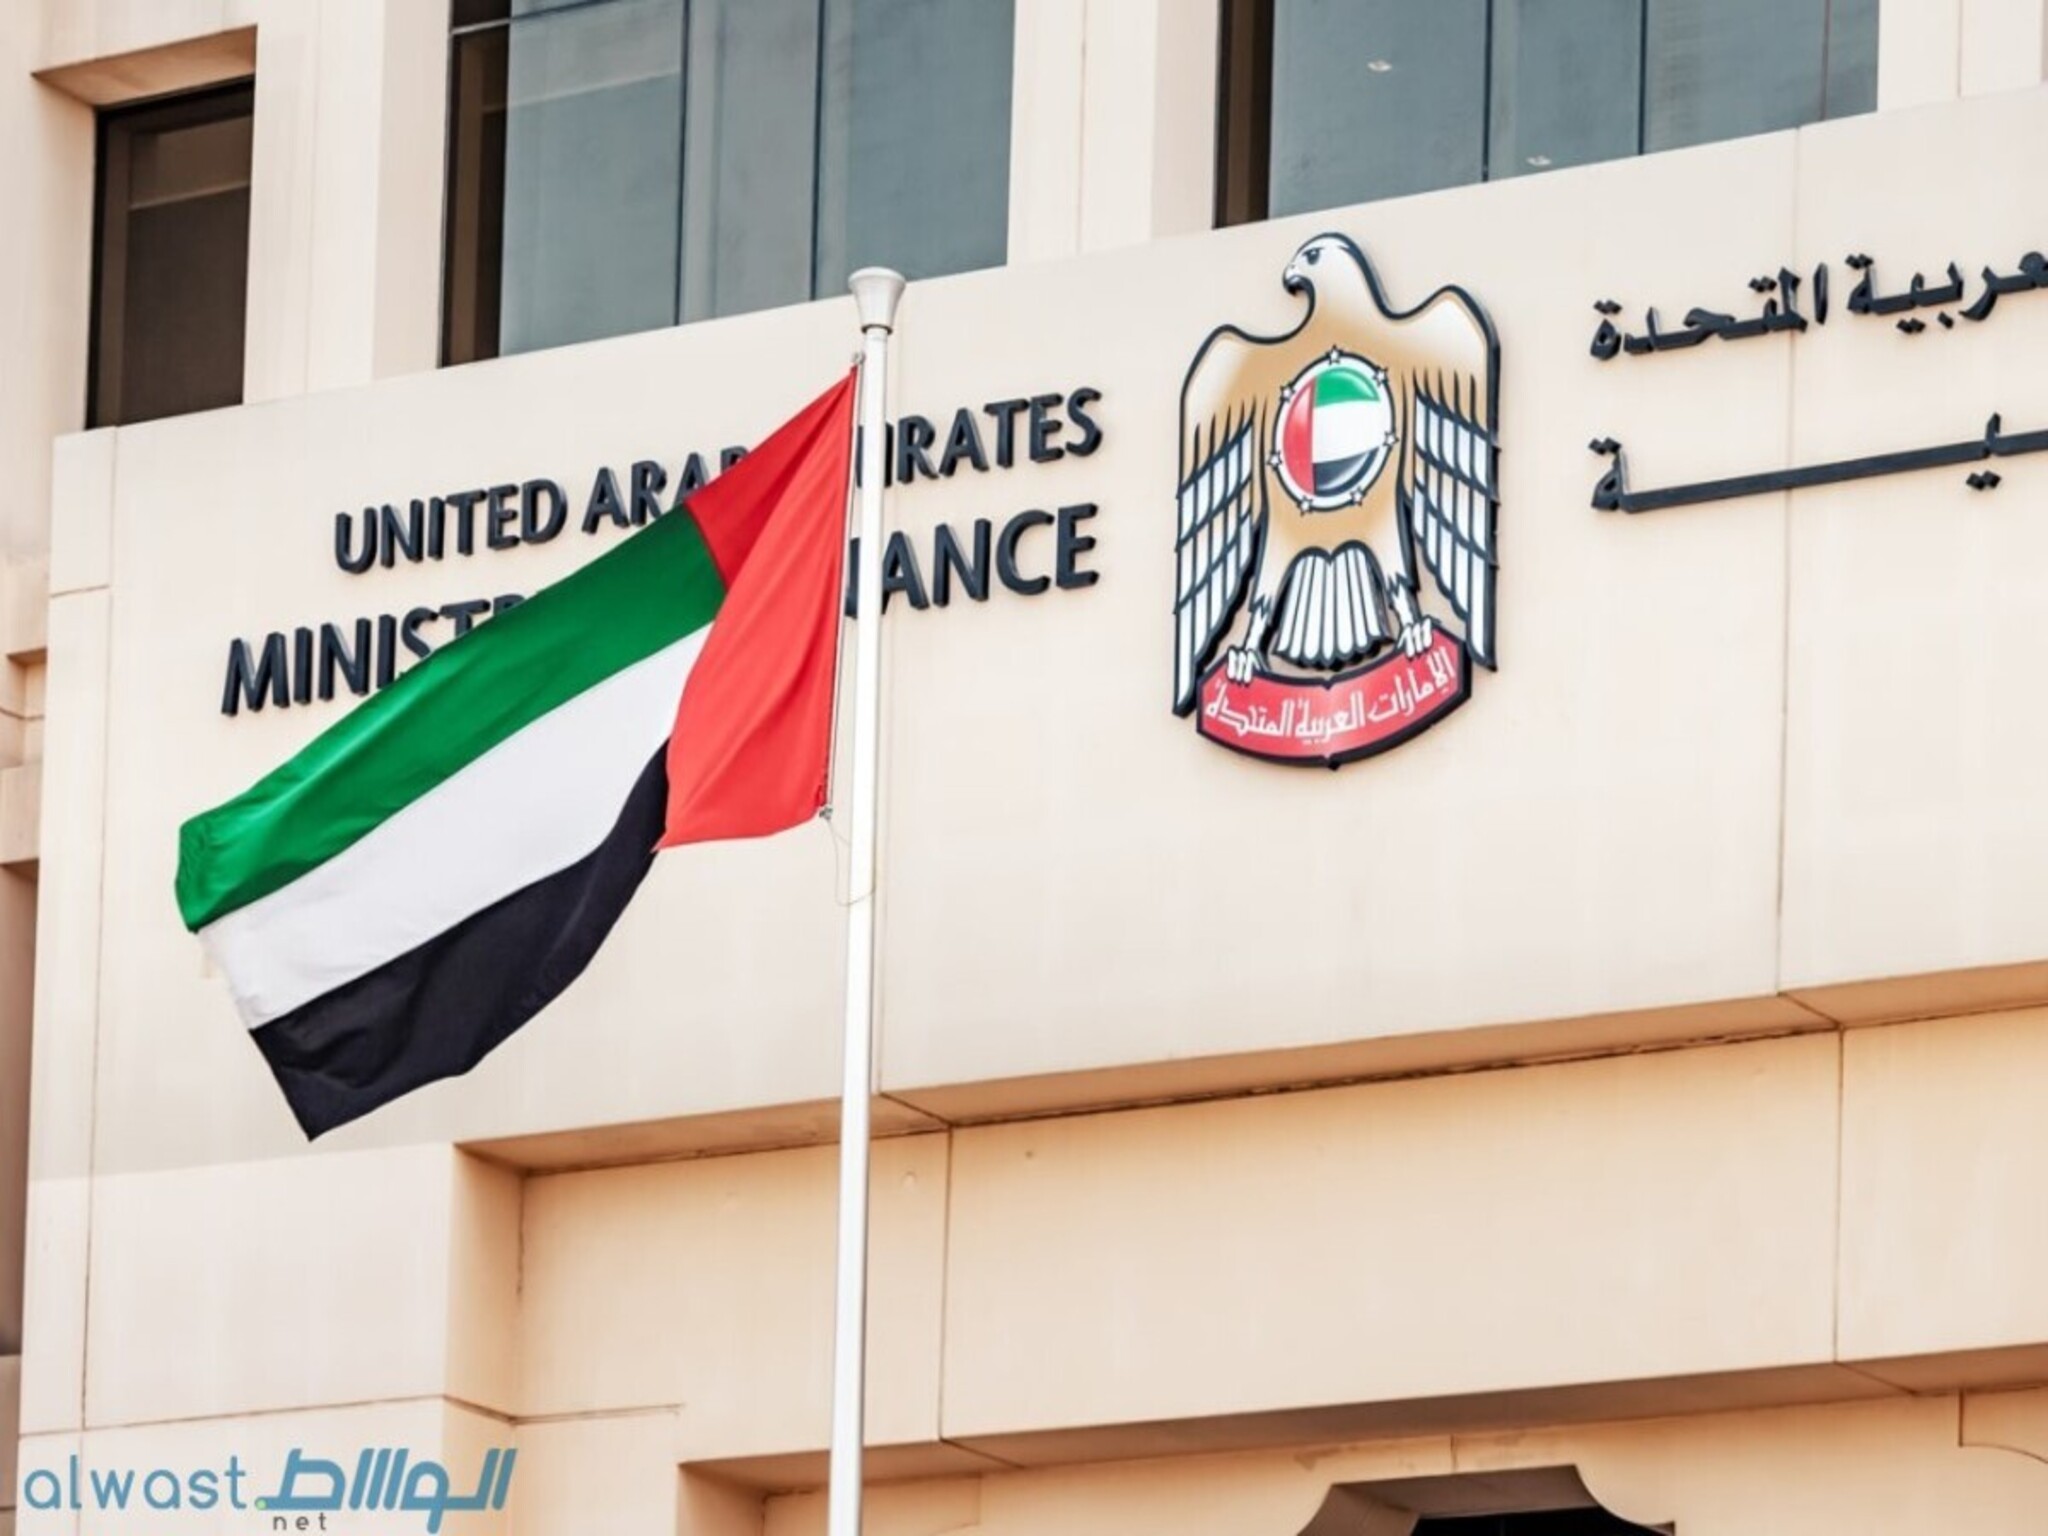 UAE announces New tax exemption rules for companies in free zones